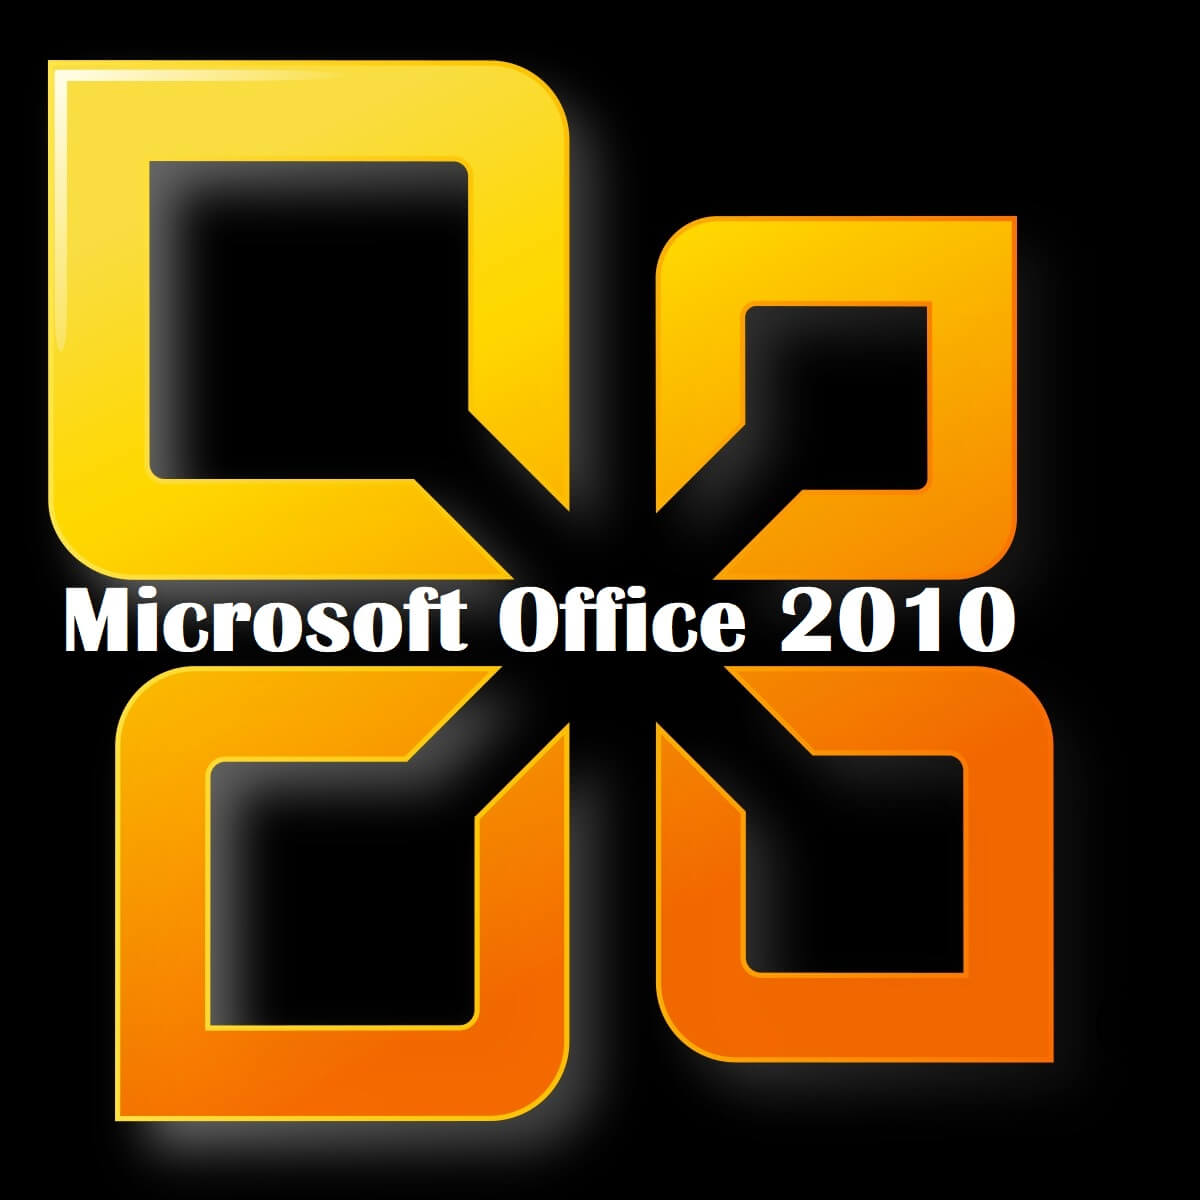 Microsoft Office 2010 Product Key Latest Download